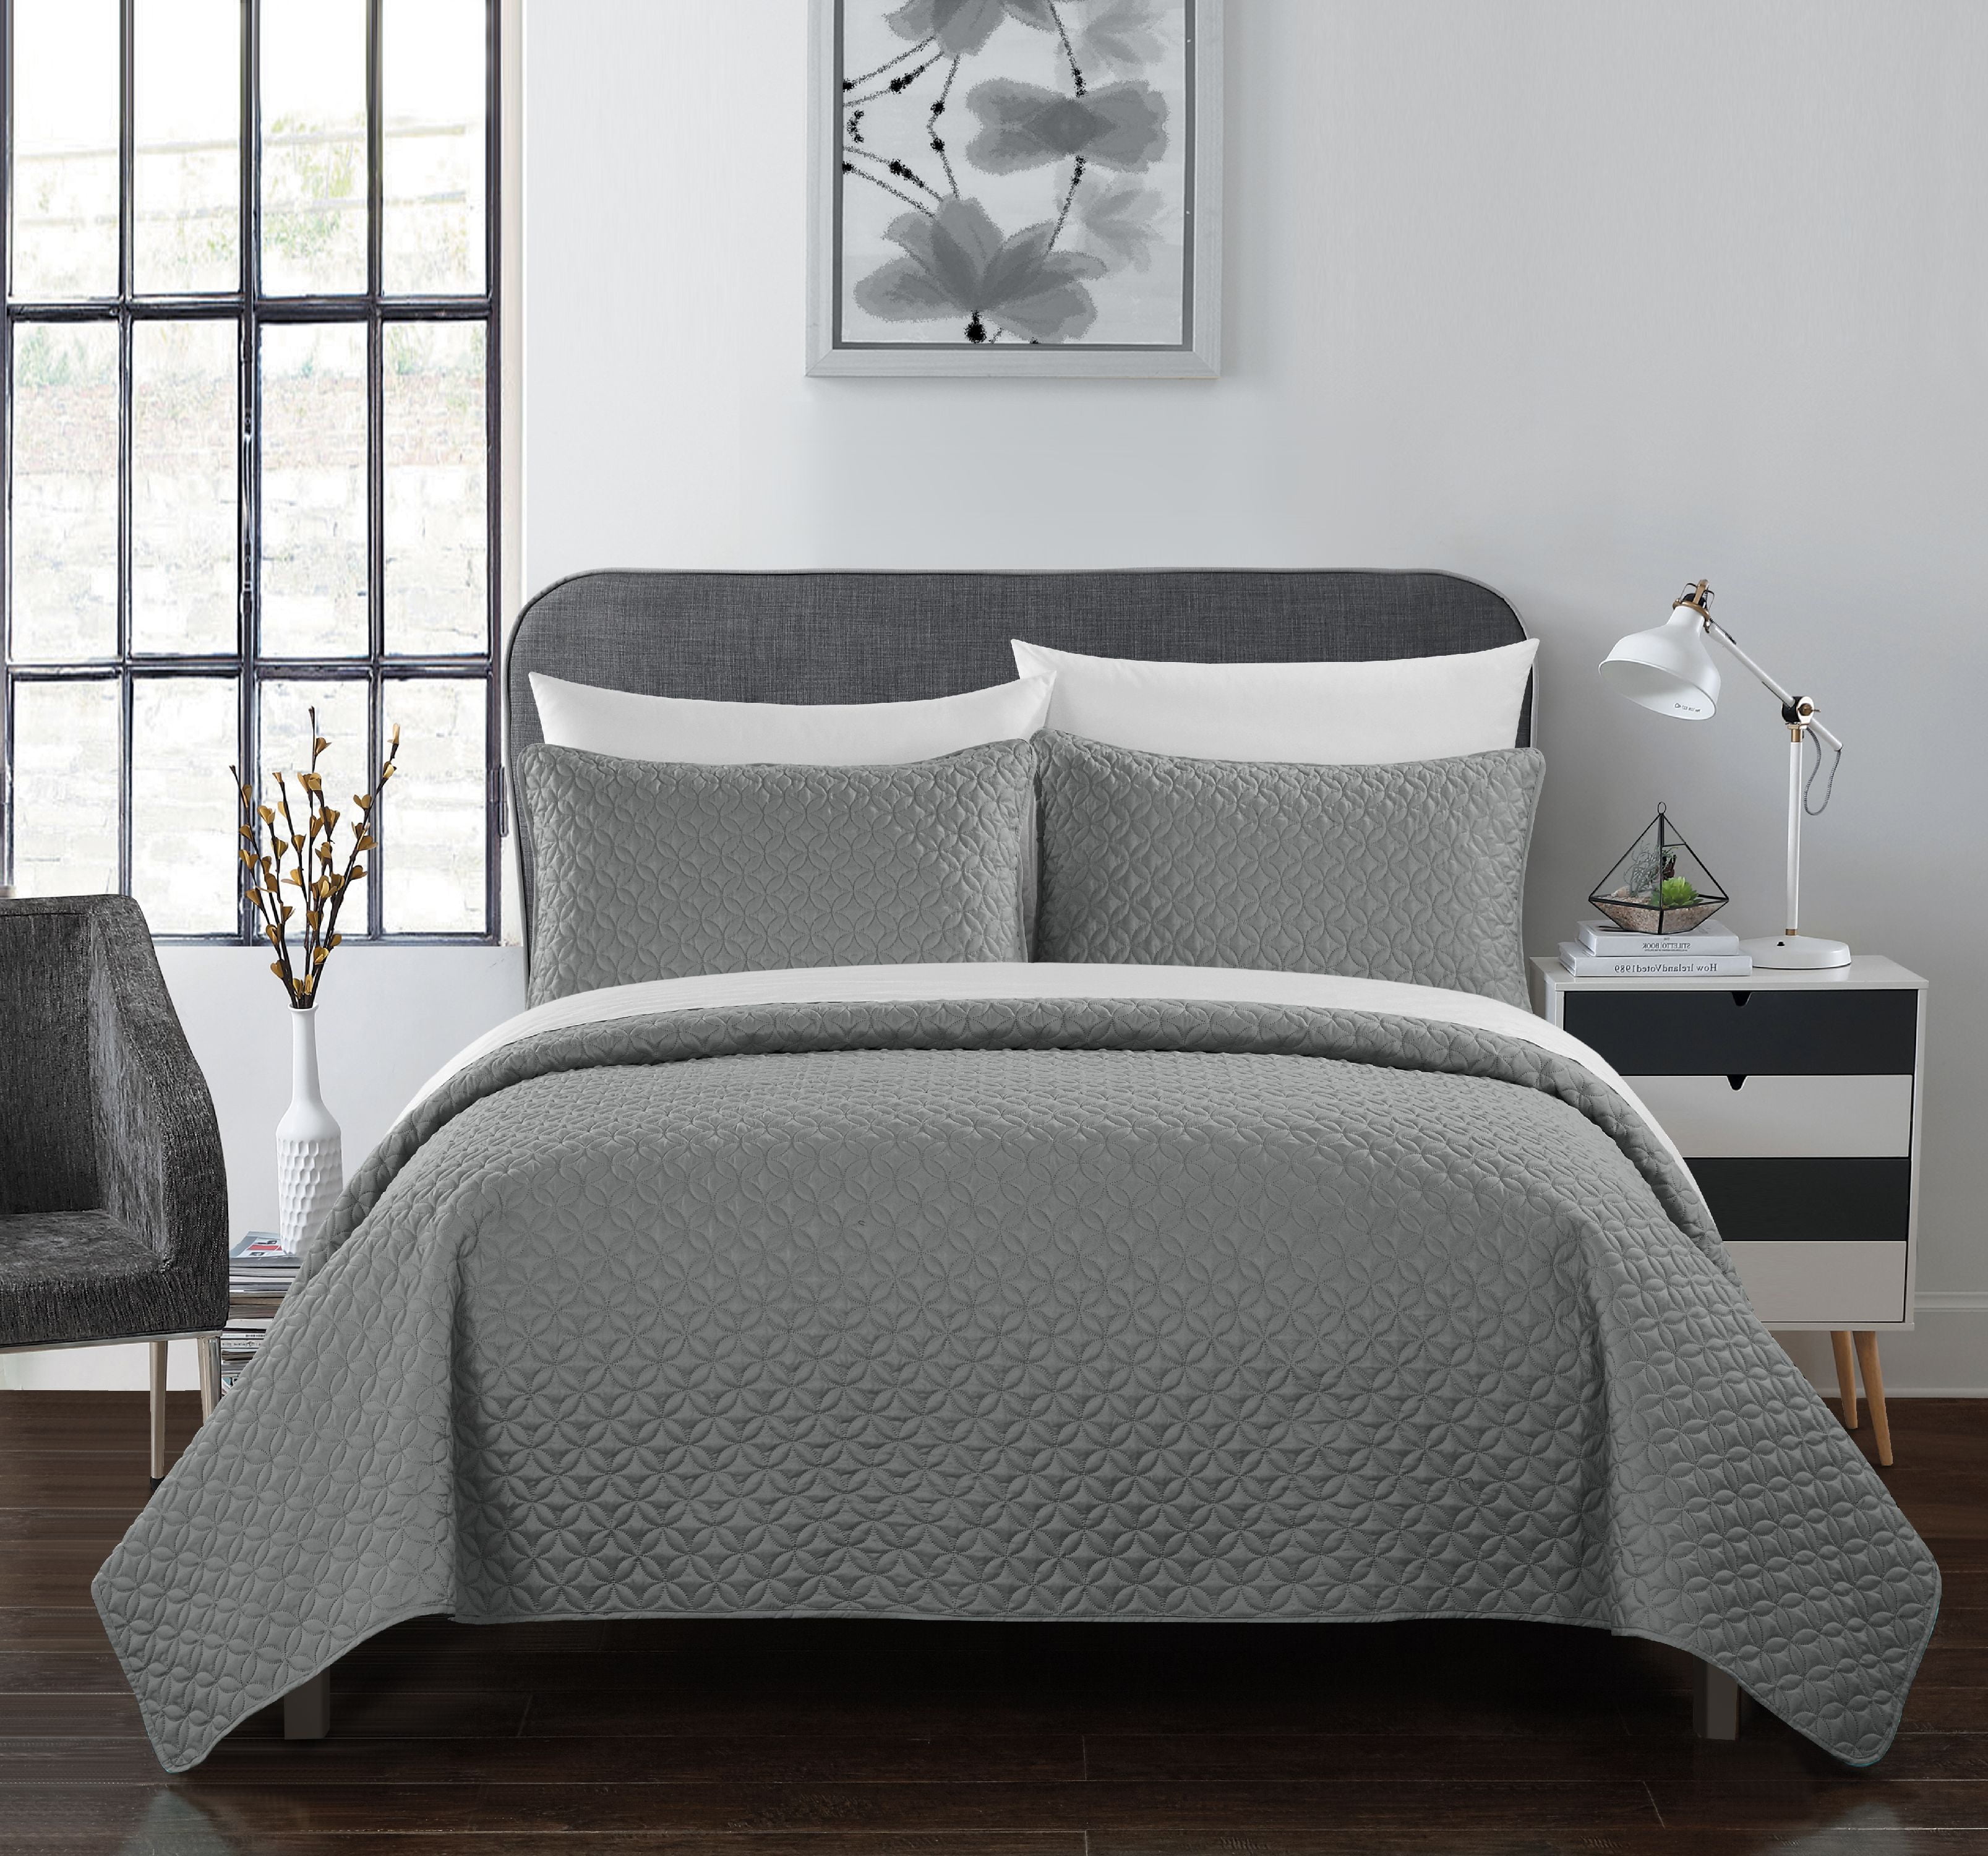 Chic Home Mather 5 Piece Quilt Cover Set Bed in a Bag - Walmart.com